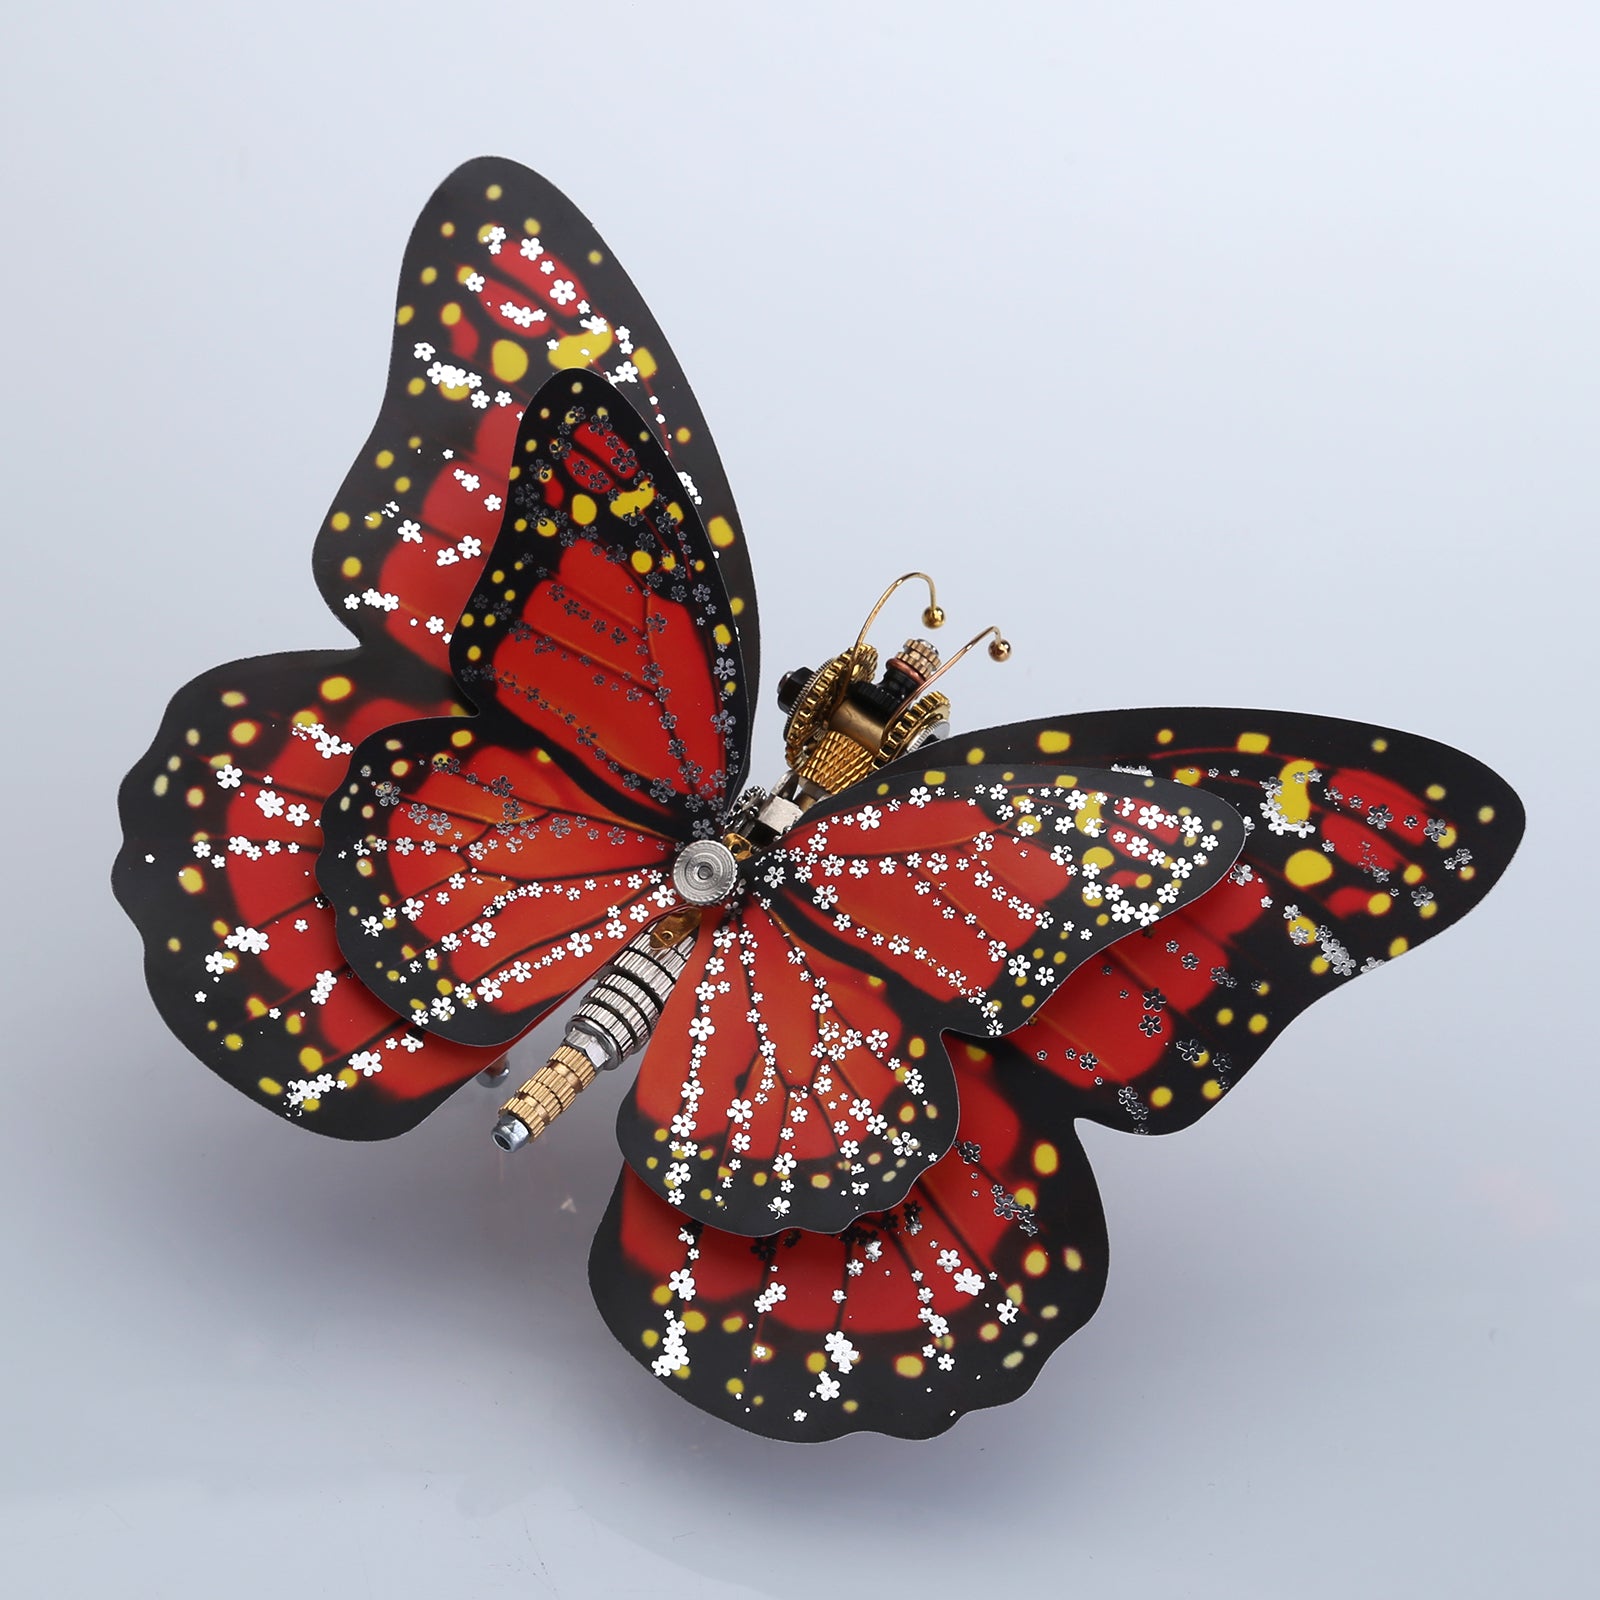 150Pcs Steampunk Scarlet Peacock Butterfly Assembly Model -Red